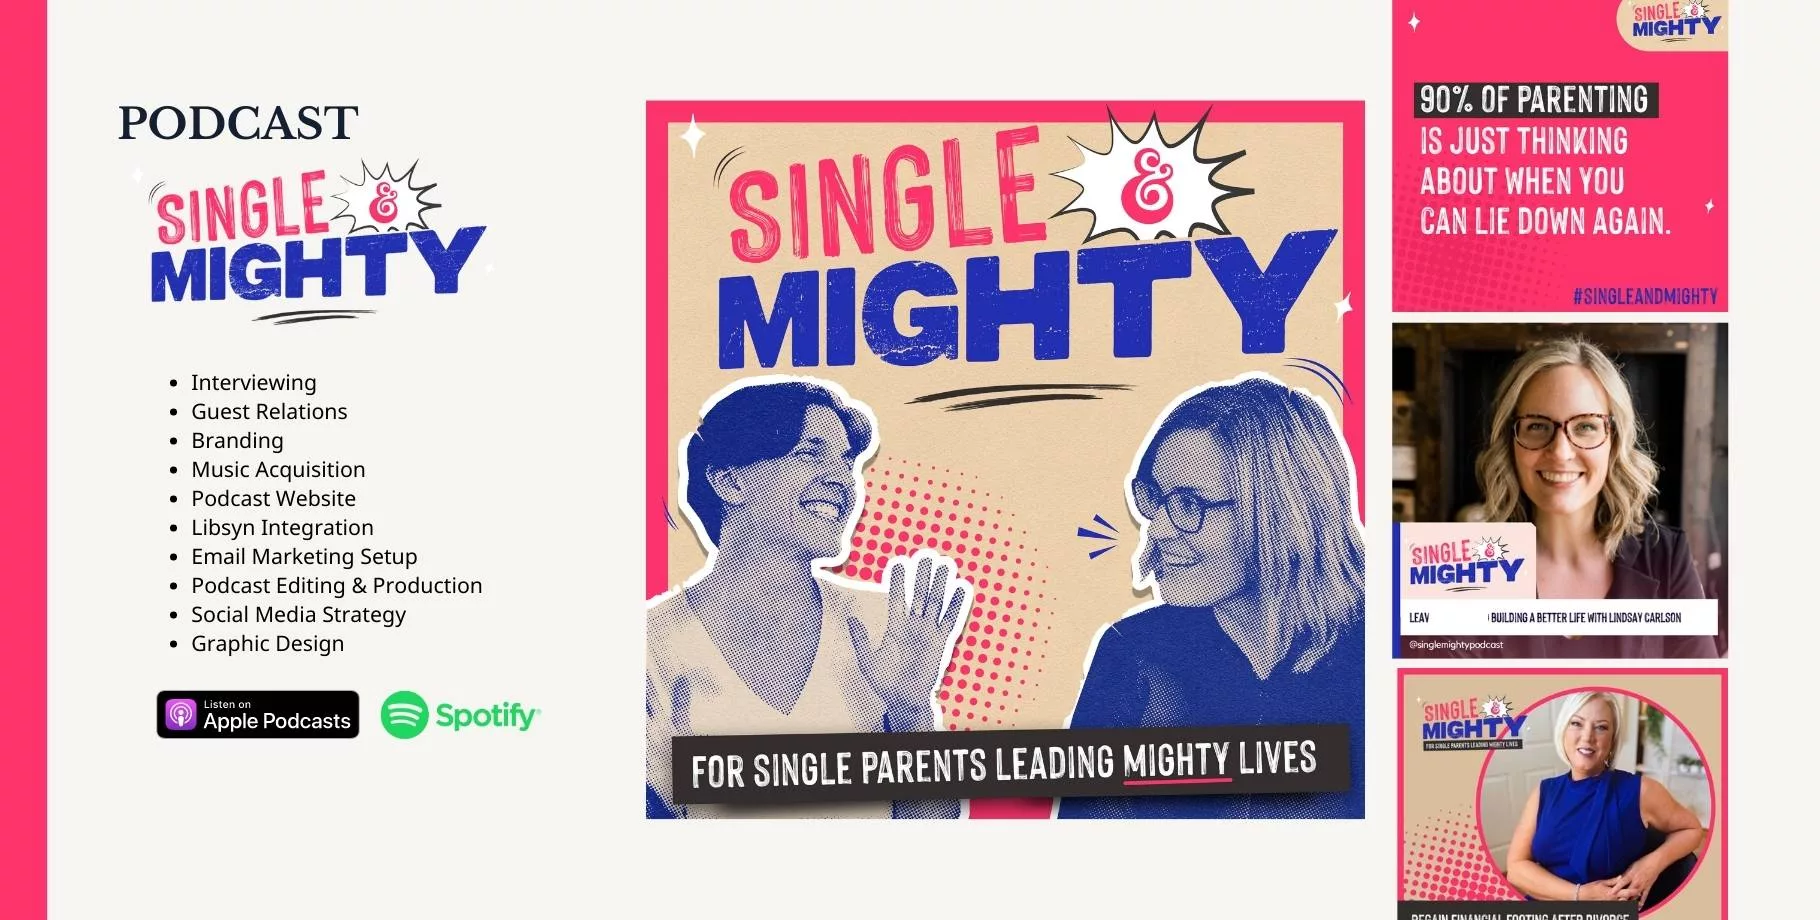 Single and Mighty Podcast produced by Mighty Ink Marketing Lindsay Carlson and Carmel Ecker